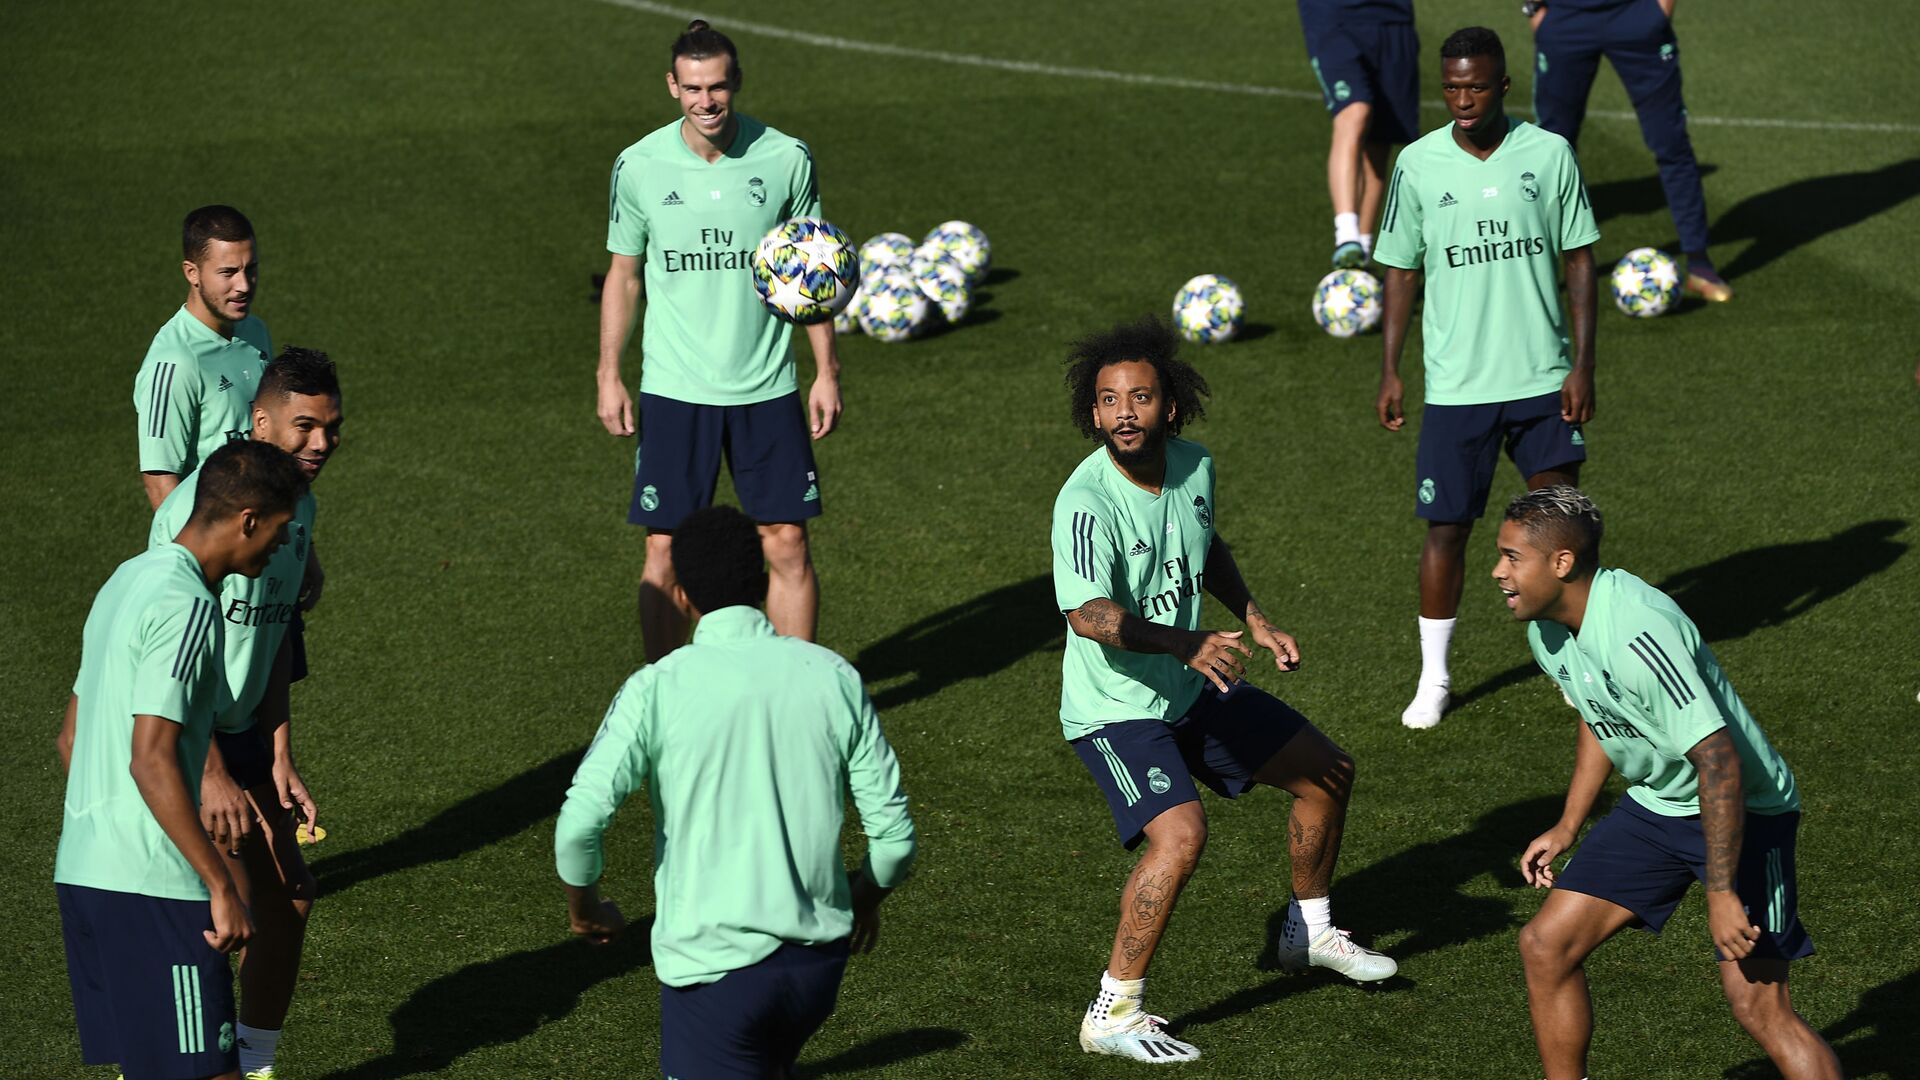 Real Madrid's French defender Raphael Varane, Real Madrid's Brazilian midfielder Casemiro, Real Madrid's Belgian forward Eden Hazard, Real Madrid's Welsh forward Gareth Bale, Real Madrid's Brazilian defender Marcelo Real Madrid's Brazilian forward Vinicius Junior and Real Madrid's Dominicans forward Mariano Diaz attend a training session at the Valdebebas training complex in the outskirts of Madrid, on September 30, 2019 - اسپوتنیک افغانستان  , 1920, 05.07.2021